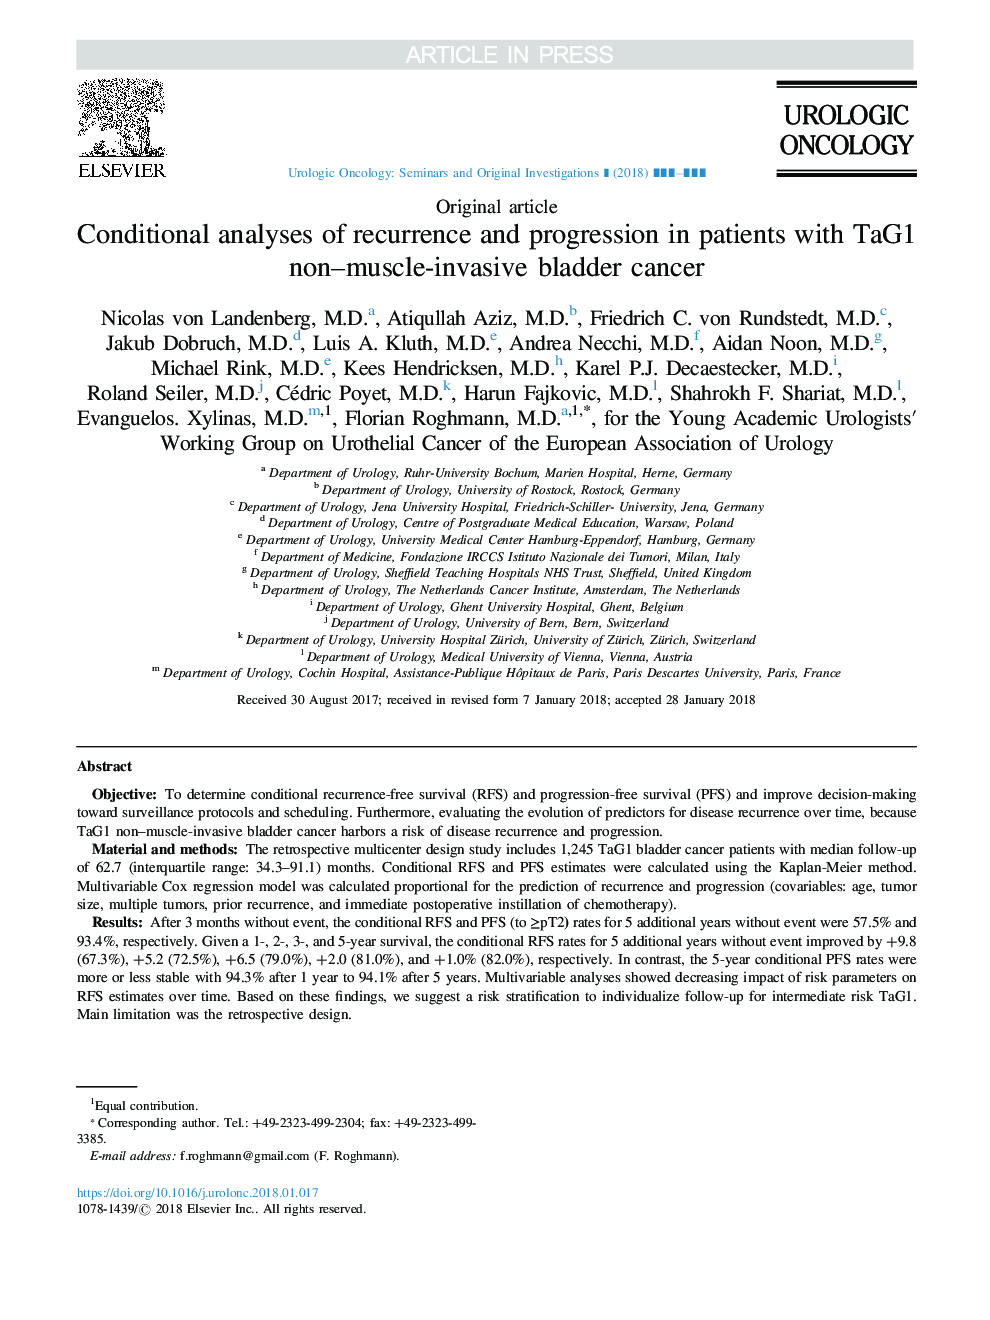 Conditional analyses of recurrence and progression in patients with TaG1 non-muscle-invasive bladder cancer